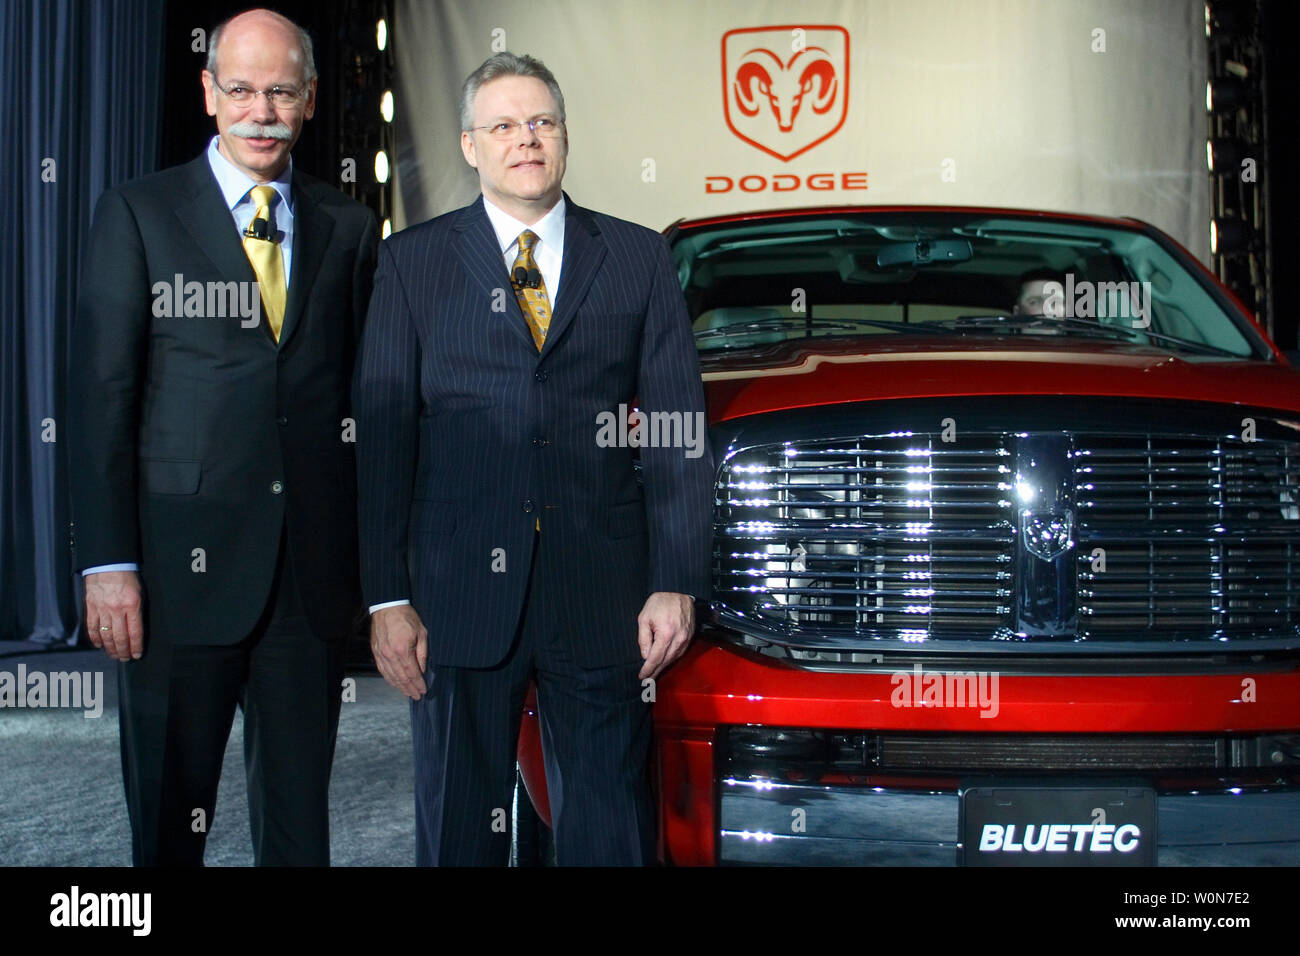 Dieter Zetsche, (L) chairman of the Board of Management of DaimlerChrysler AG and the head of Mercedes Car Group and Thomas W. LaSorda, Chrysler Group President and CEO, poses with new 2007 Dodge Ran 3500 at that Washington Car Show on January 23, 2007. The Dodge Ram Heavy Duty 6.7 liter with turbo-diesel engine that use emotion reduction technologies reducing Nitrogen oxide emotion by 90% meeting EPA's 2010 EPA clean diesel standards. (UPI Photo/Kamenko Pajic ) Stock Photo